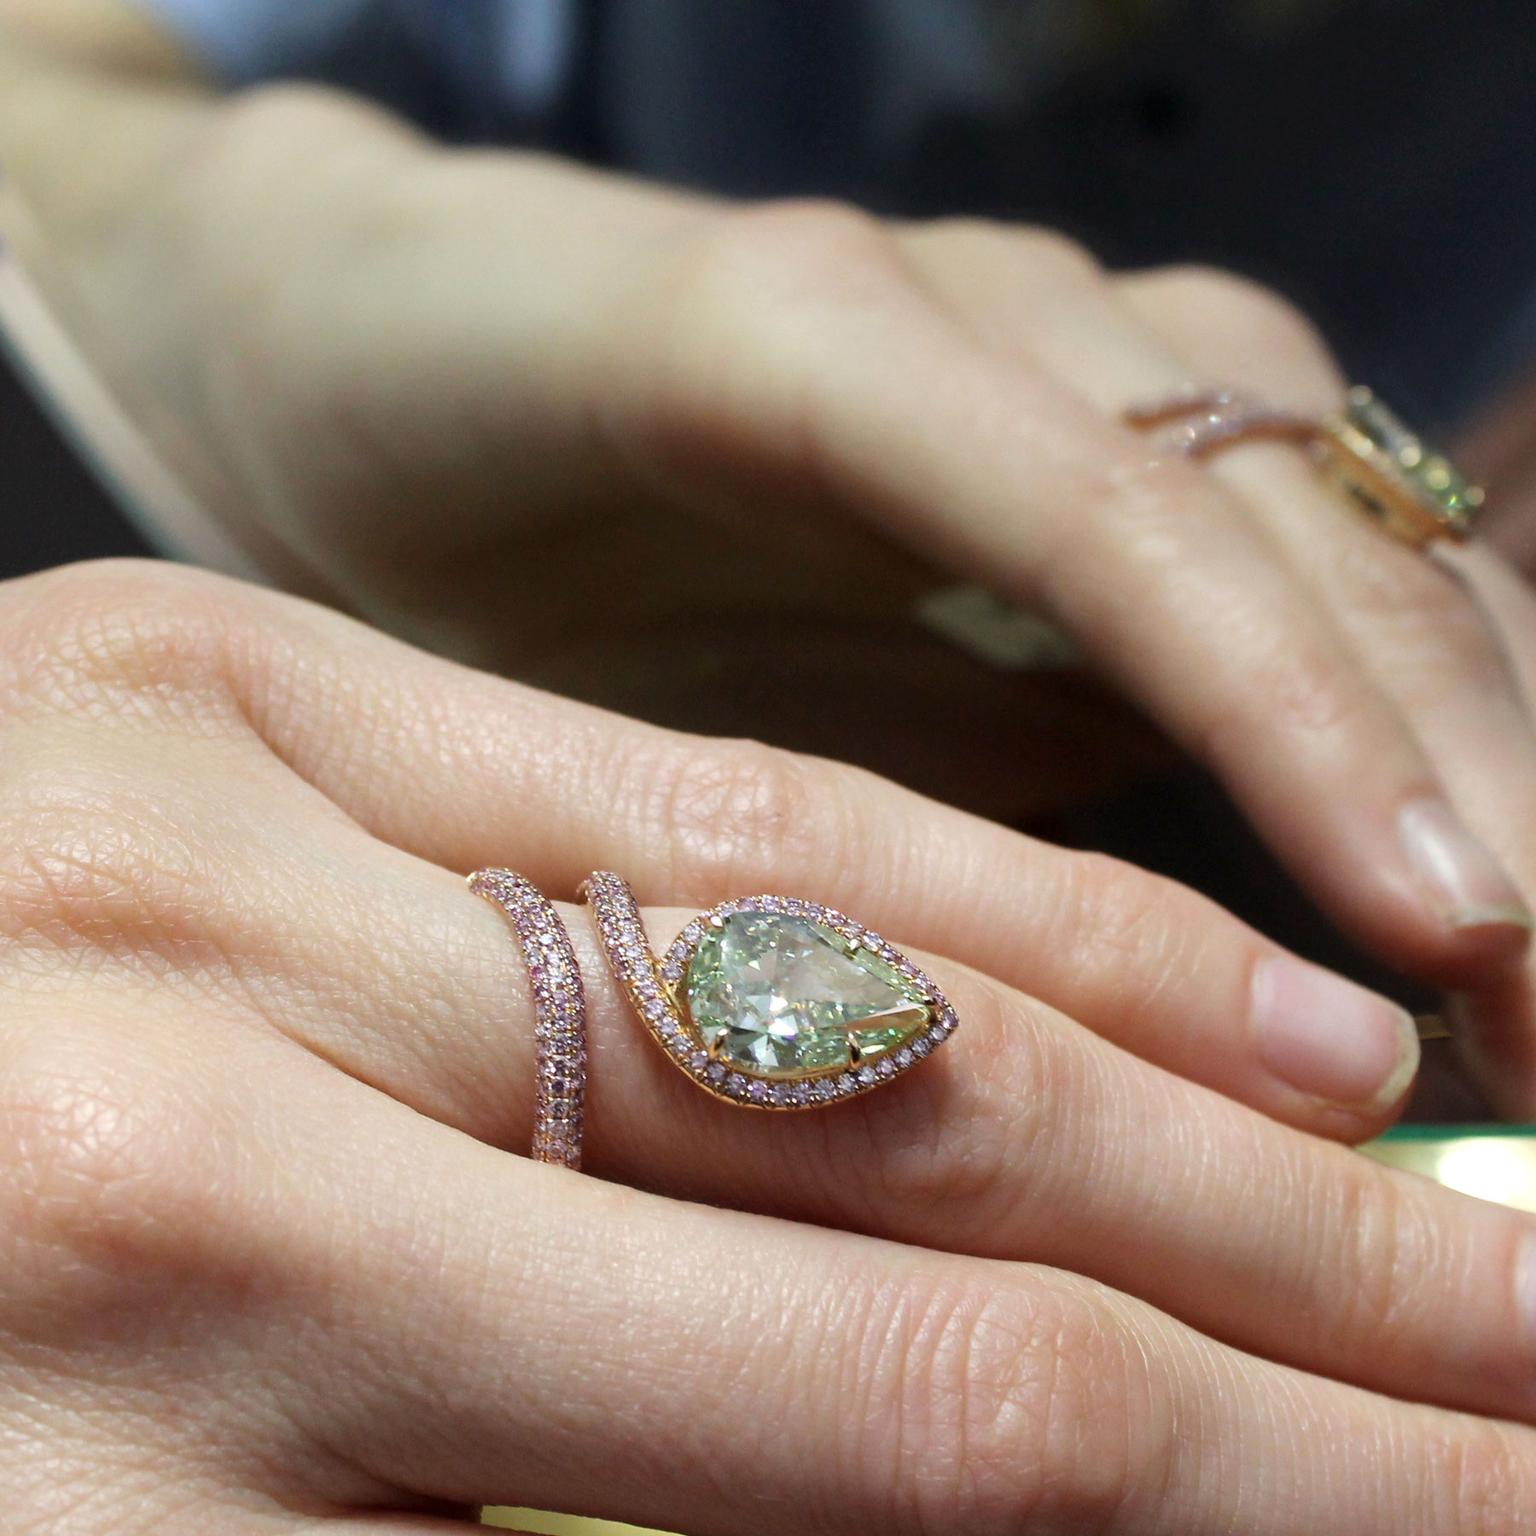 Softly does it: the allure of unusual coloured diamonds